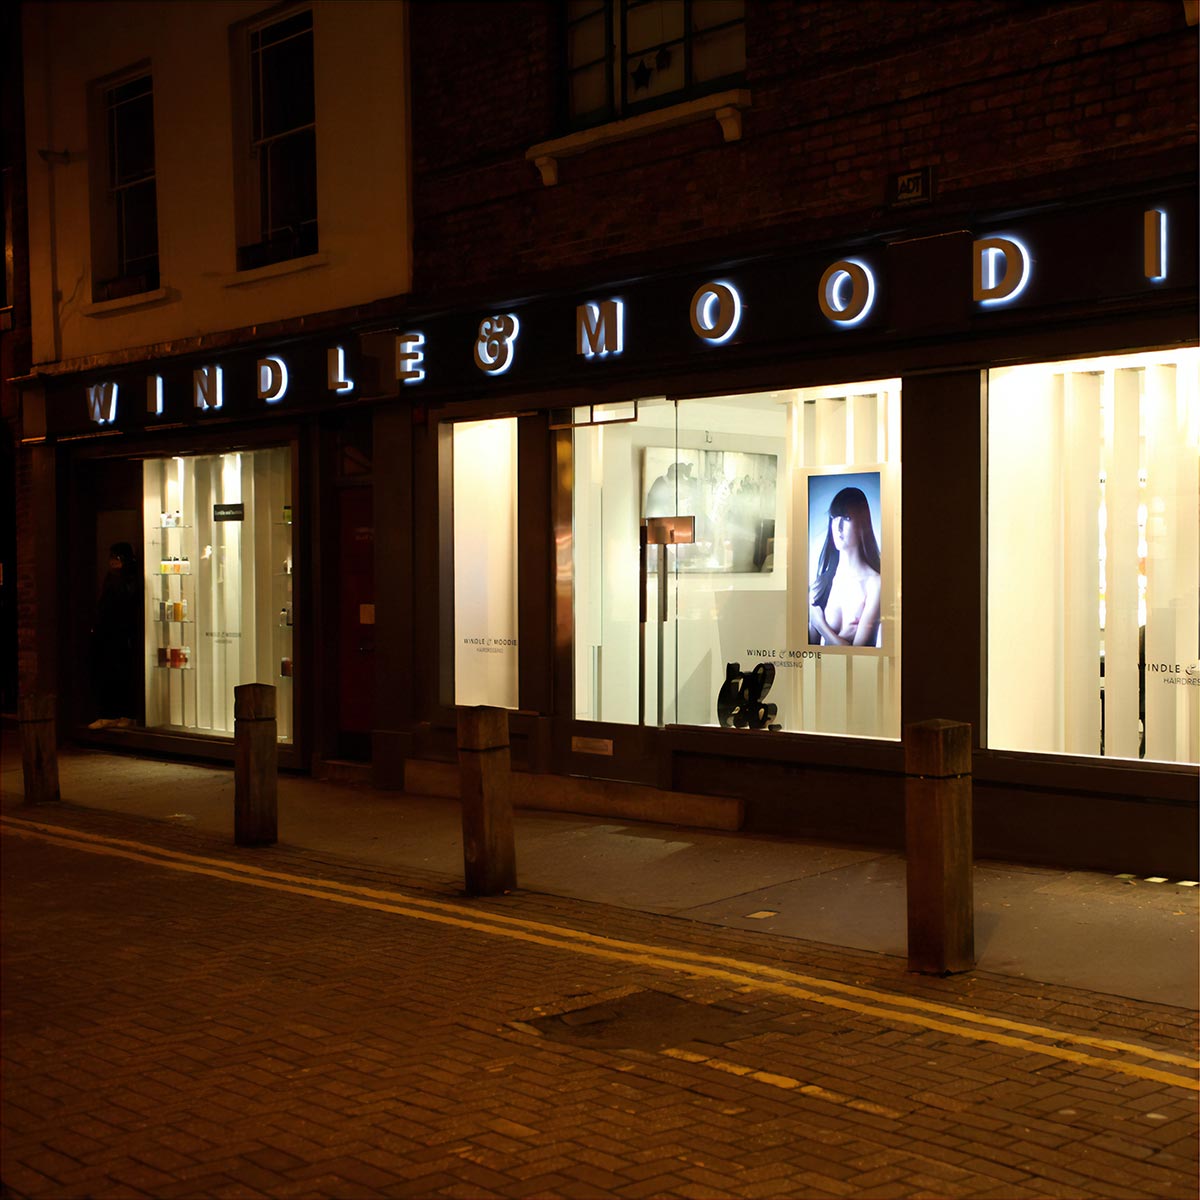 Commercial Lighting Design - Windle & Moodie Hair Salon